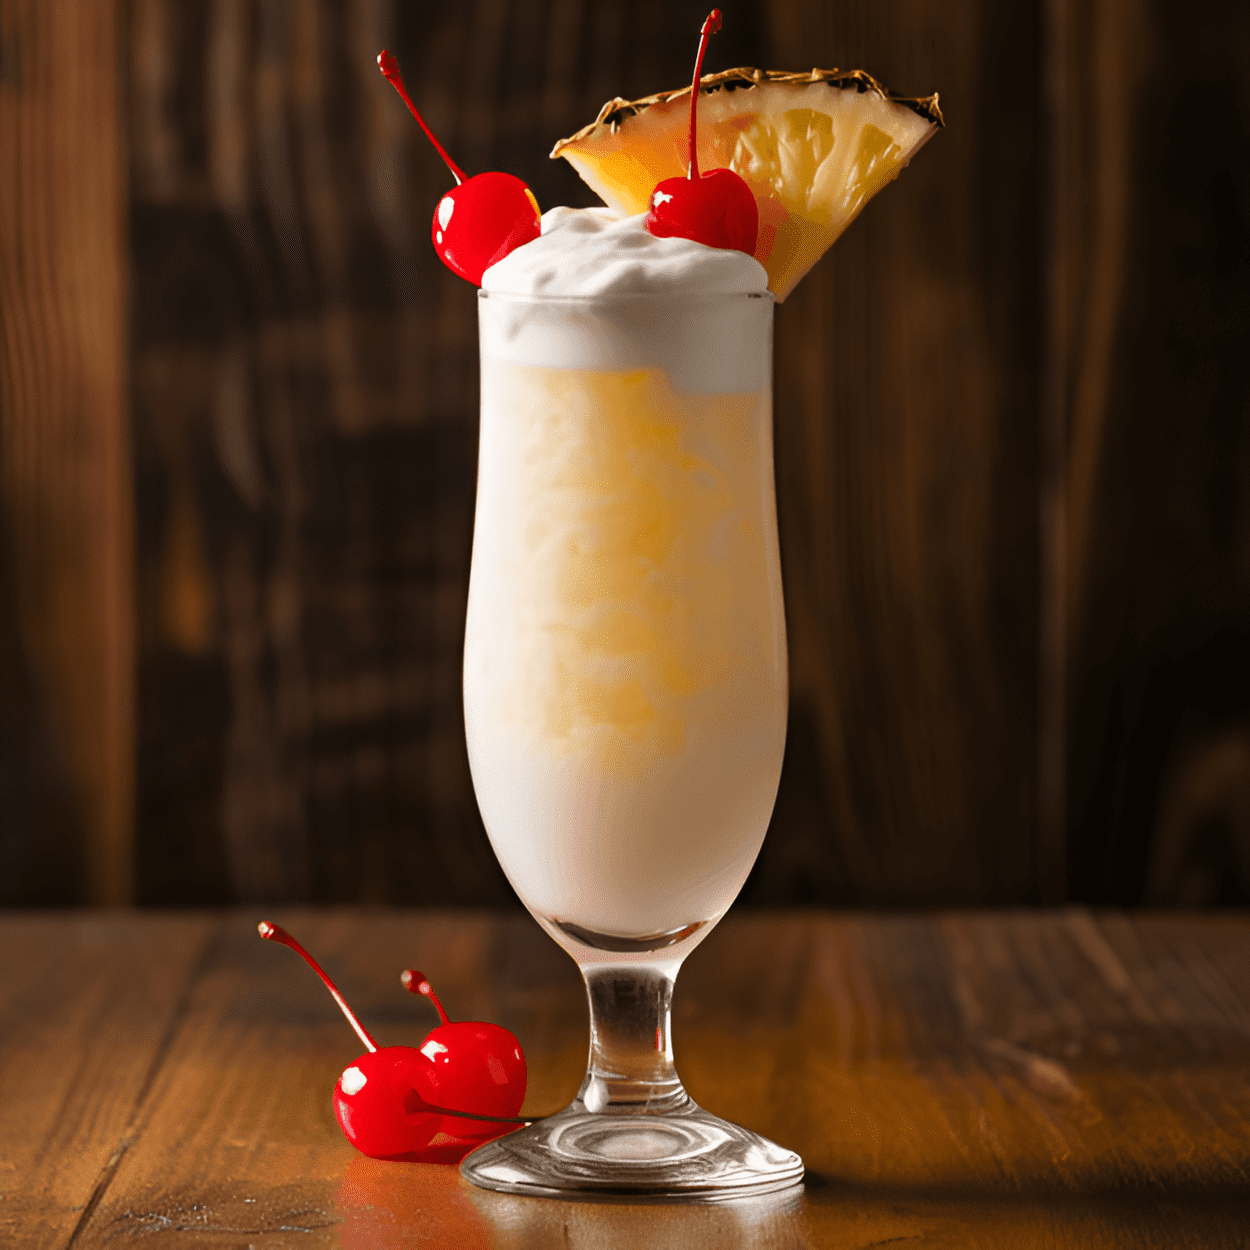 Coconut Cream Piña Colada Cocktail Recipe - The Coconut Cream Piña Colada is a creamy, sweet, and tropical cocktail. It has a rich coconut flavor, balanced by the tanginess of the pineapple and the warmth of the rum. It's like a tropical vacation in a glass.